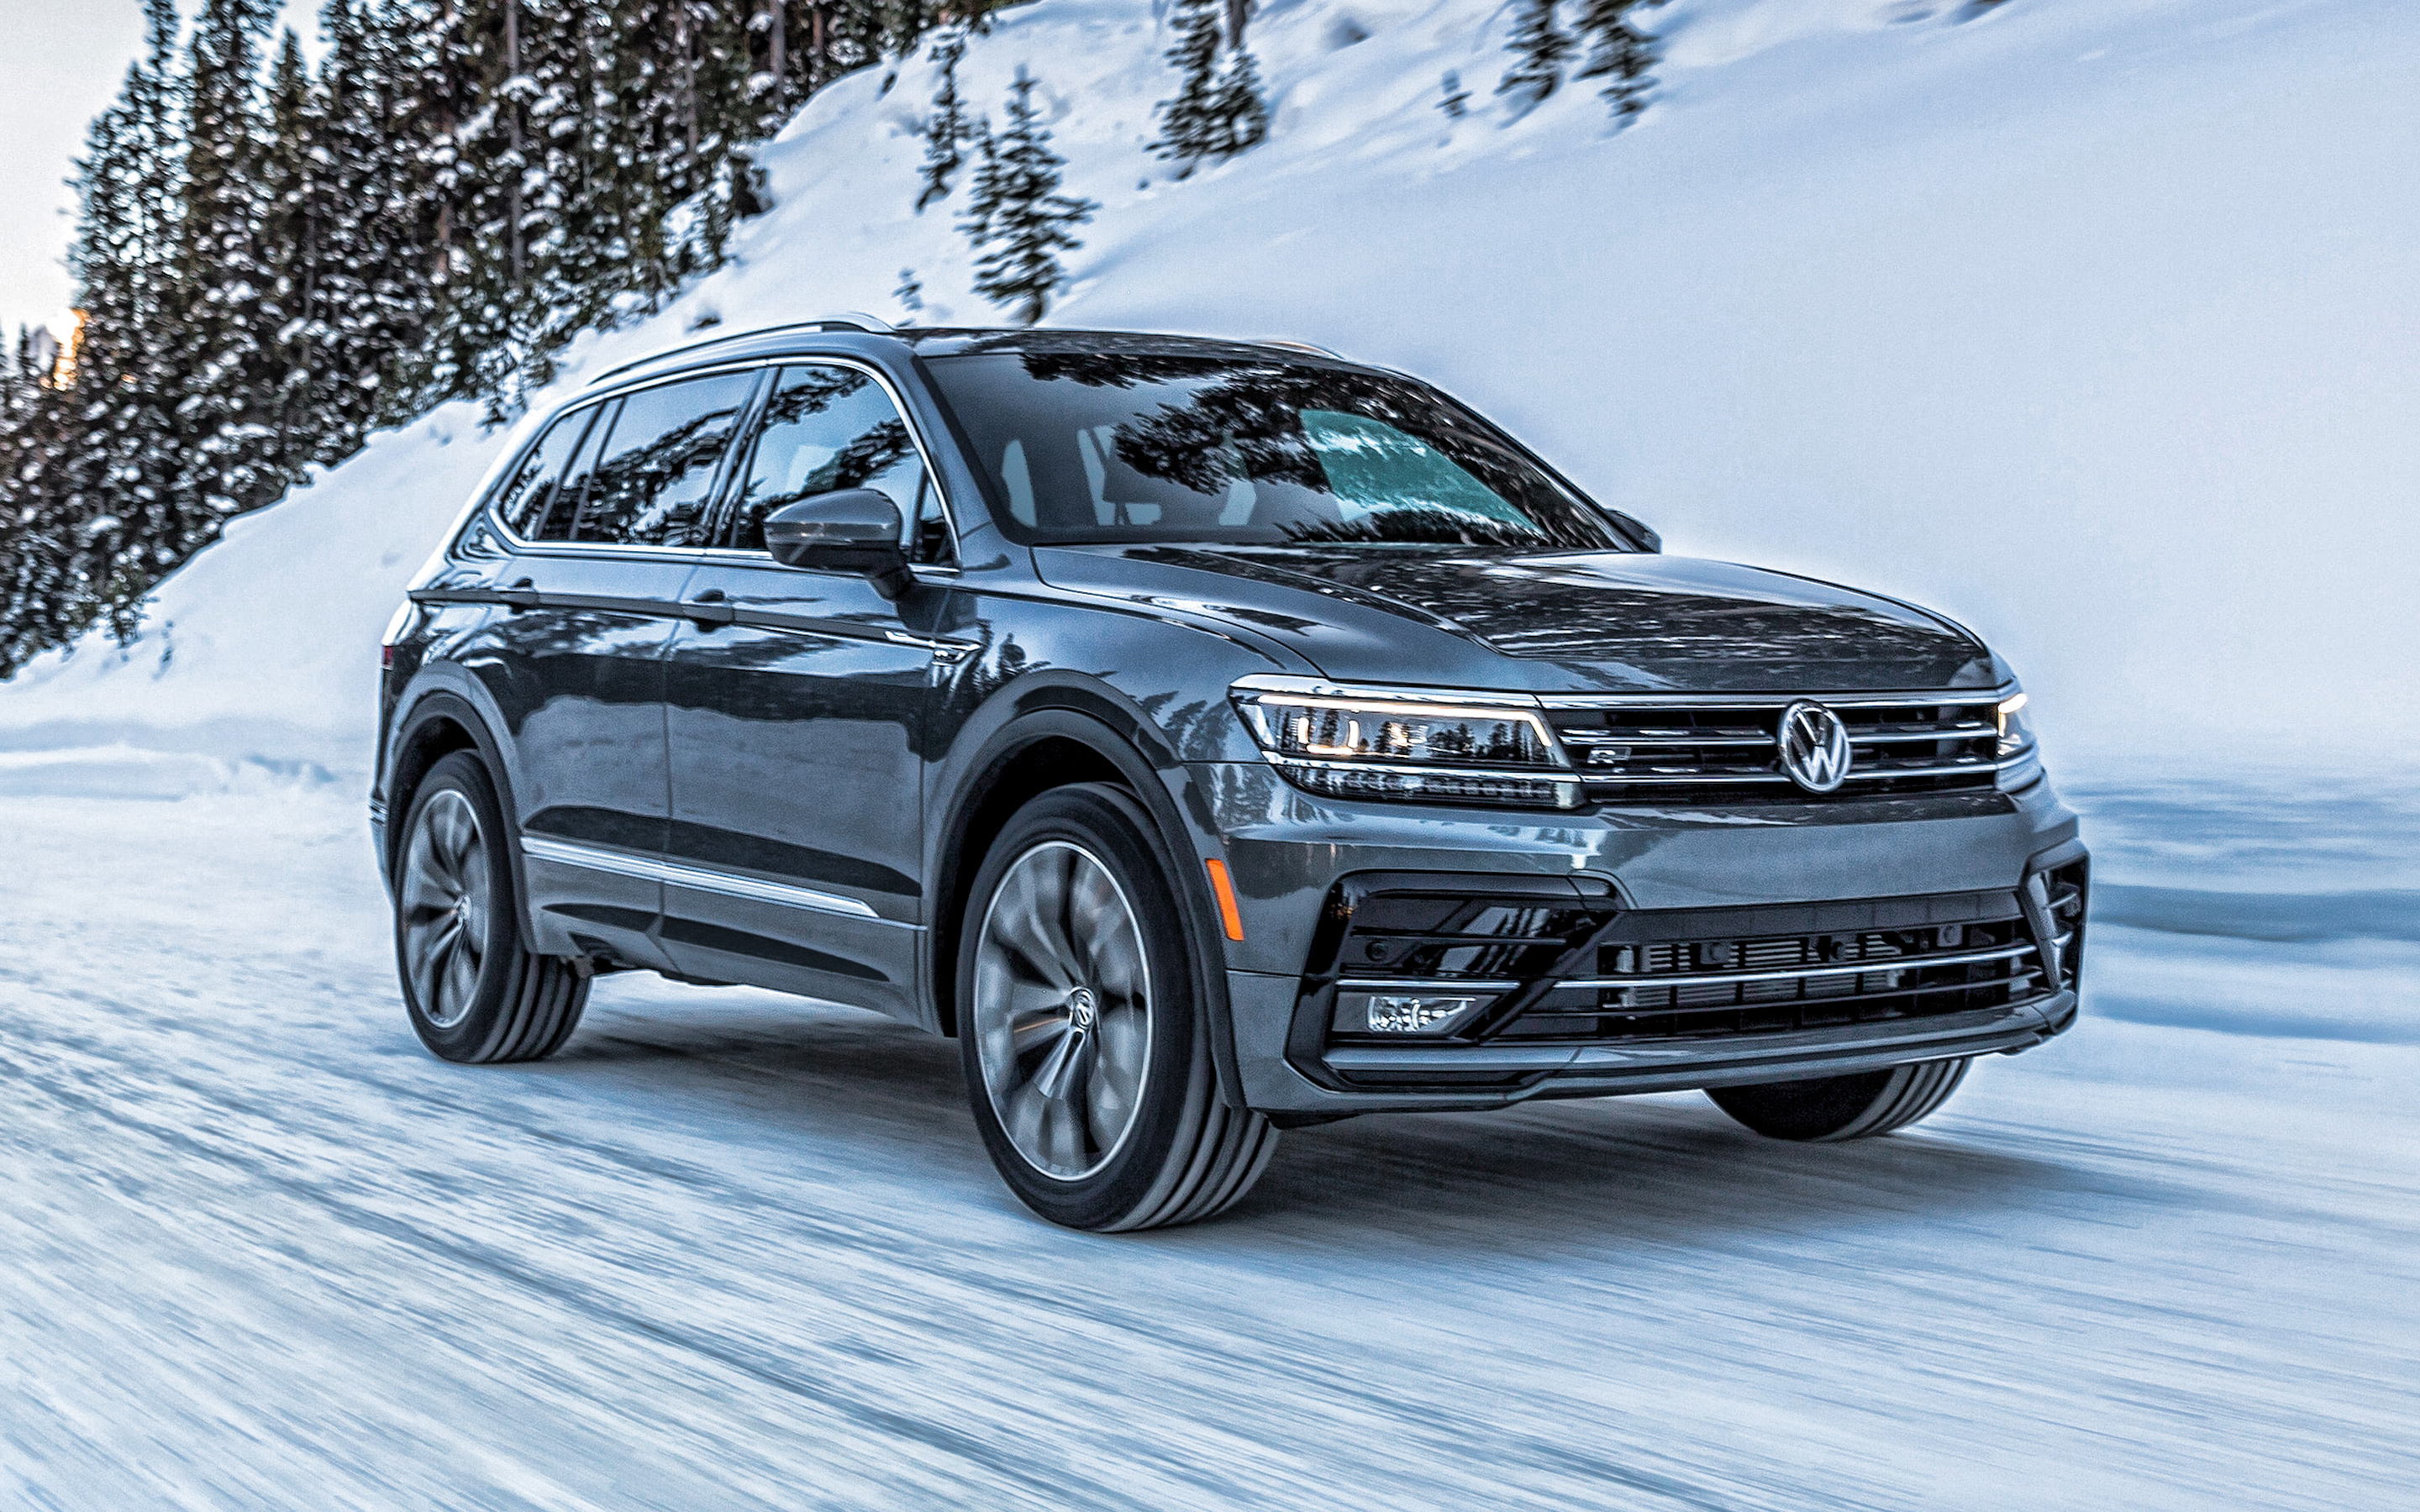 Volkswagen Tiguan 2019, Striking and stylish, All-weather capability, Versatile and spacious, 2880x1800 HD Desktop